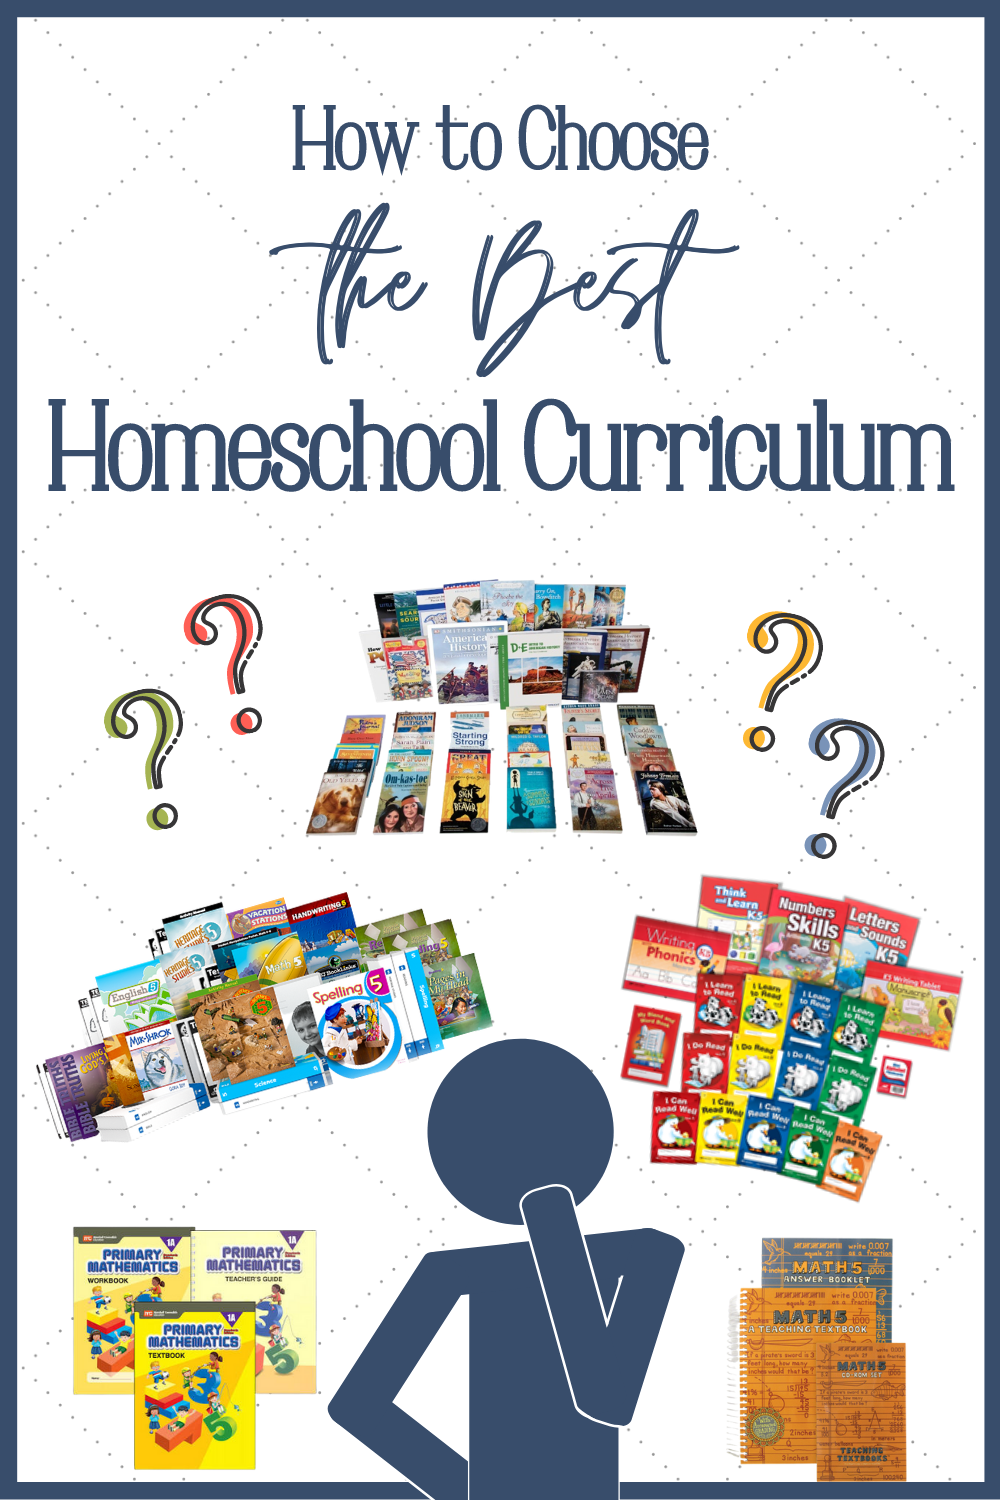 how to choose the best curriculum for your homeschooled child